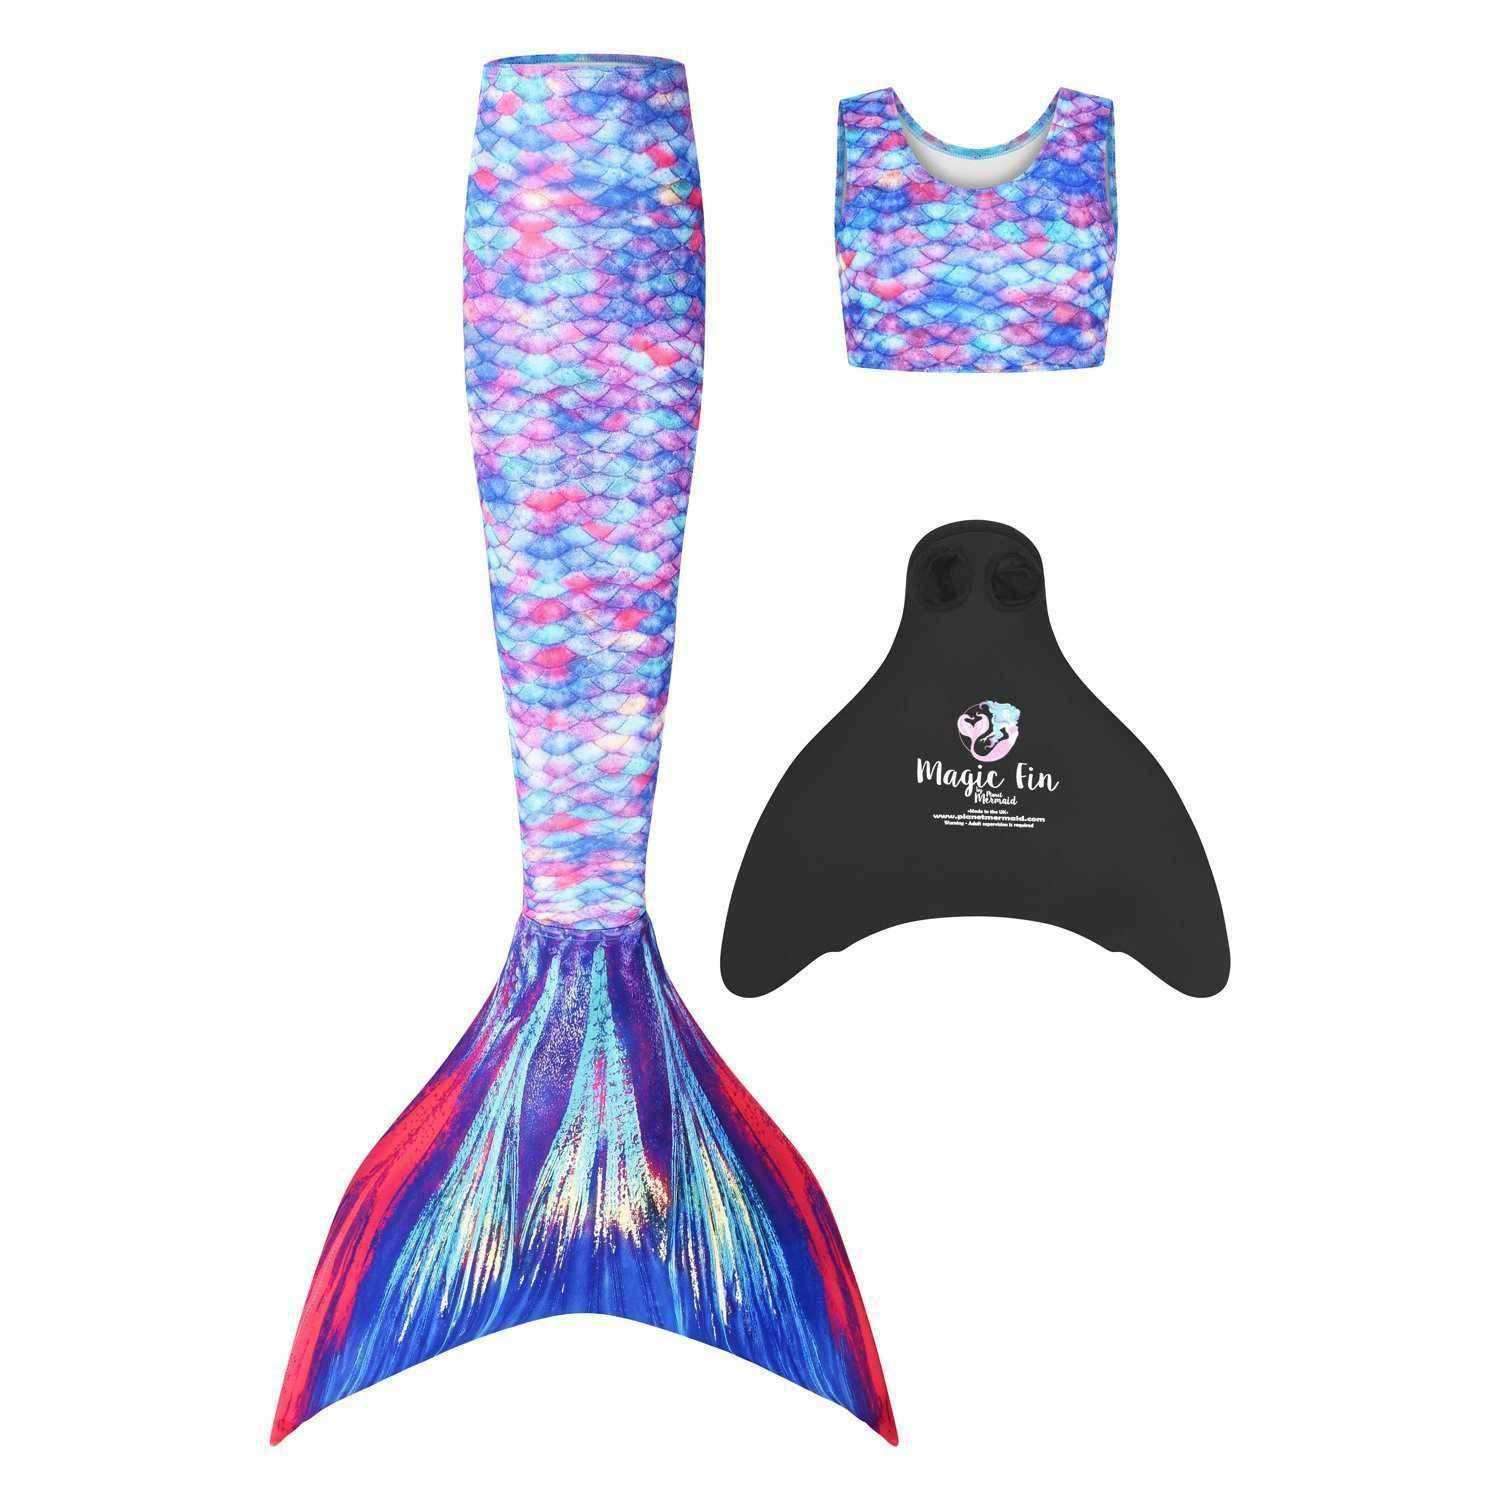 Starbright Princess Mermaid Tail  Fun Swimmable Tails and Fins - Mermaids  Tail